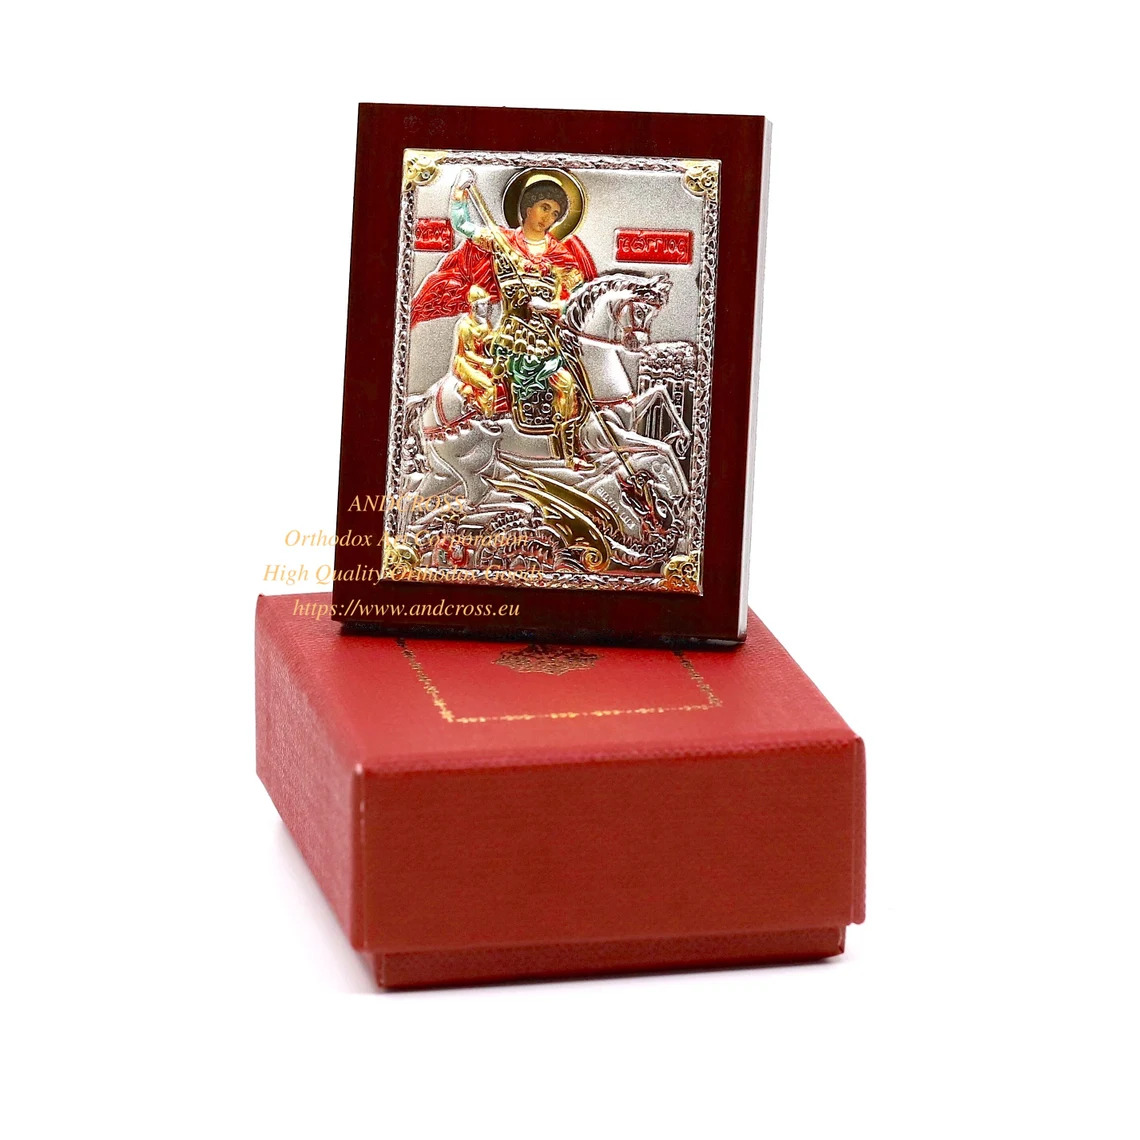 Silver Plated .999 Icon St George Warrior The Victory Bearer. (6.4cm X 5cm). B303|Silver Plated .999 Icon St George Warrior The Victory Bearer. (6.4cm X 5cm). B303|Silver Plated .999 Icon St George Warrior The Victory Bearer. (6.4cm X 5cm). B303|Silver Plated .999 Icon St George Warrior The Victory Bearer. (6.4cm X 5cm). B303|Silver Plated .999 Icon St George Warrior The Victory Bearer. (6.4cm X 5cm). B303|Silver Plated .999 Icon St George Warrior The Victory Bearer. (6.4cm X 5cm). B303